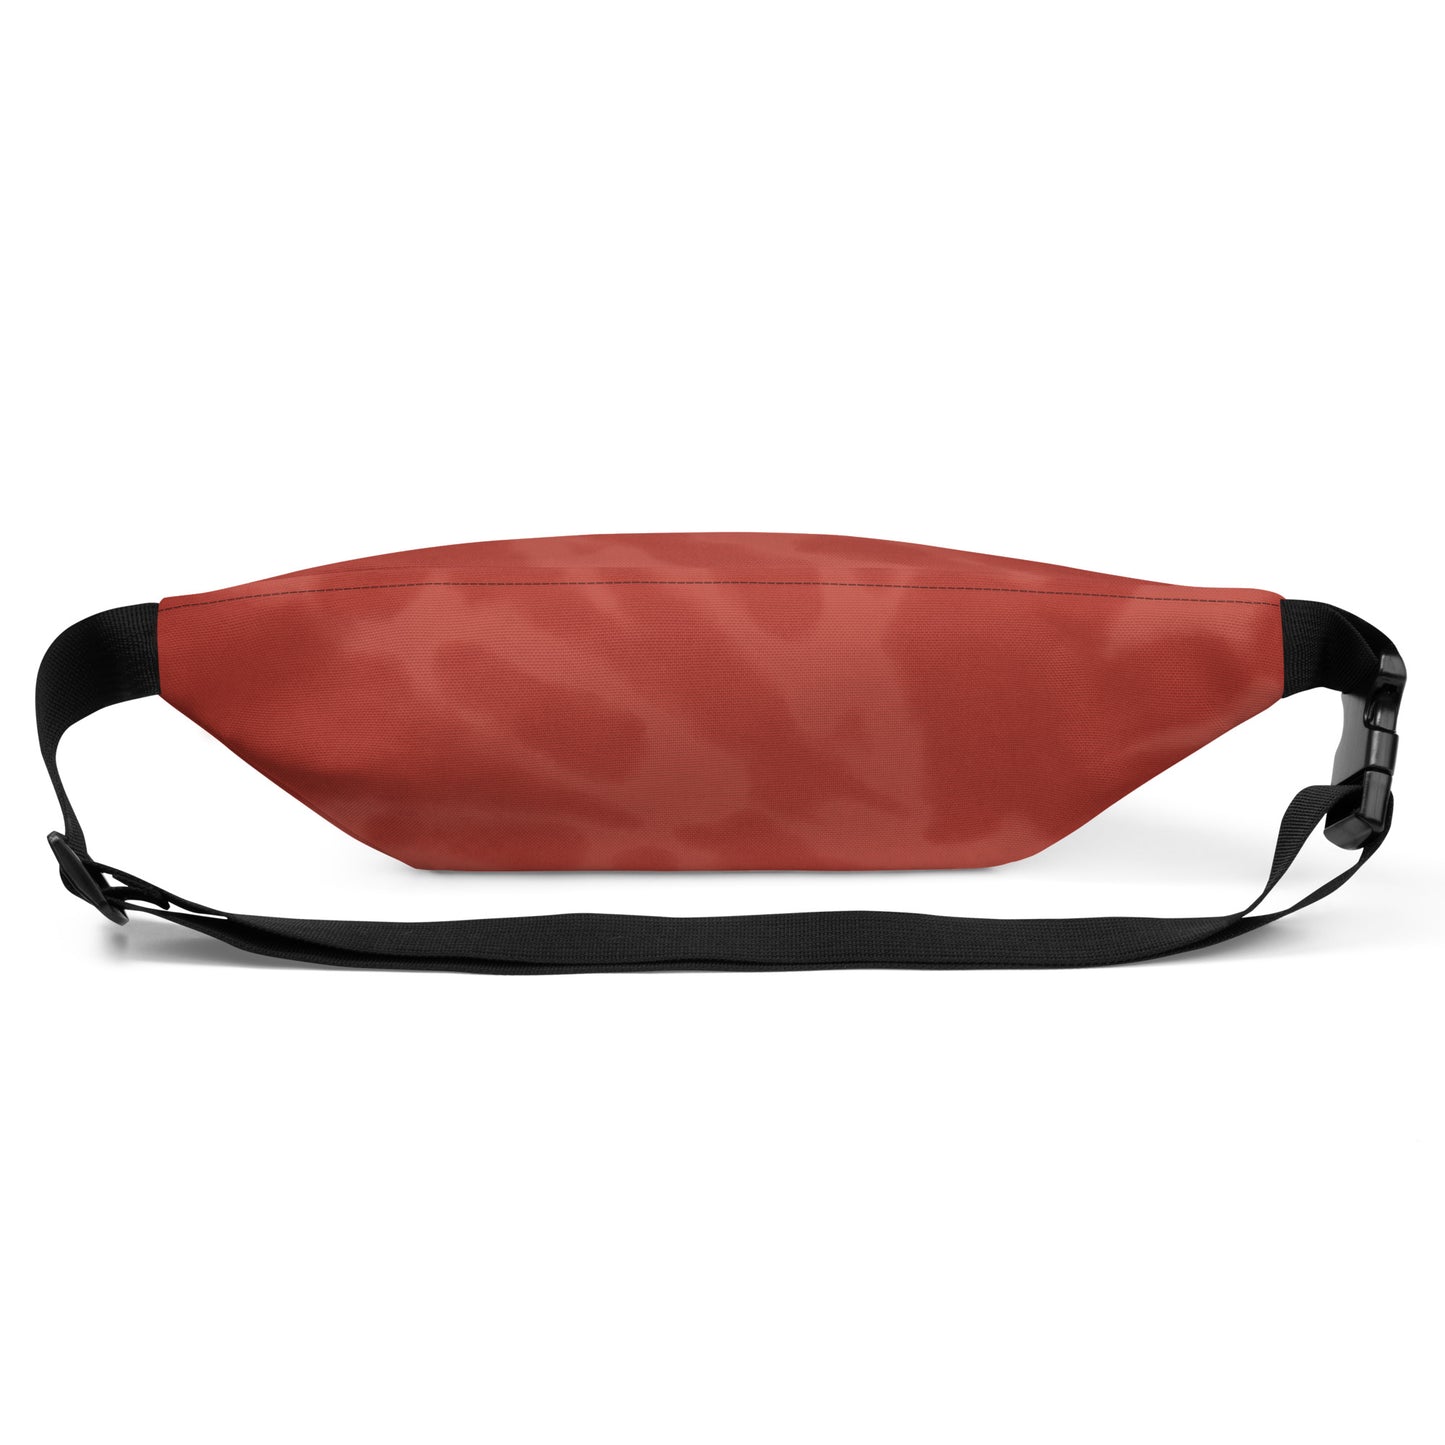 Travel Gift Fanny Pack - Red Tie-Dye • GIG Rio de Janeiro • YHM Designs - Image 09